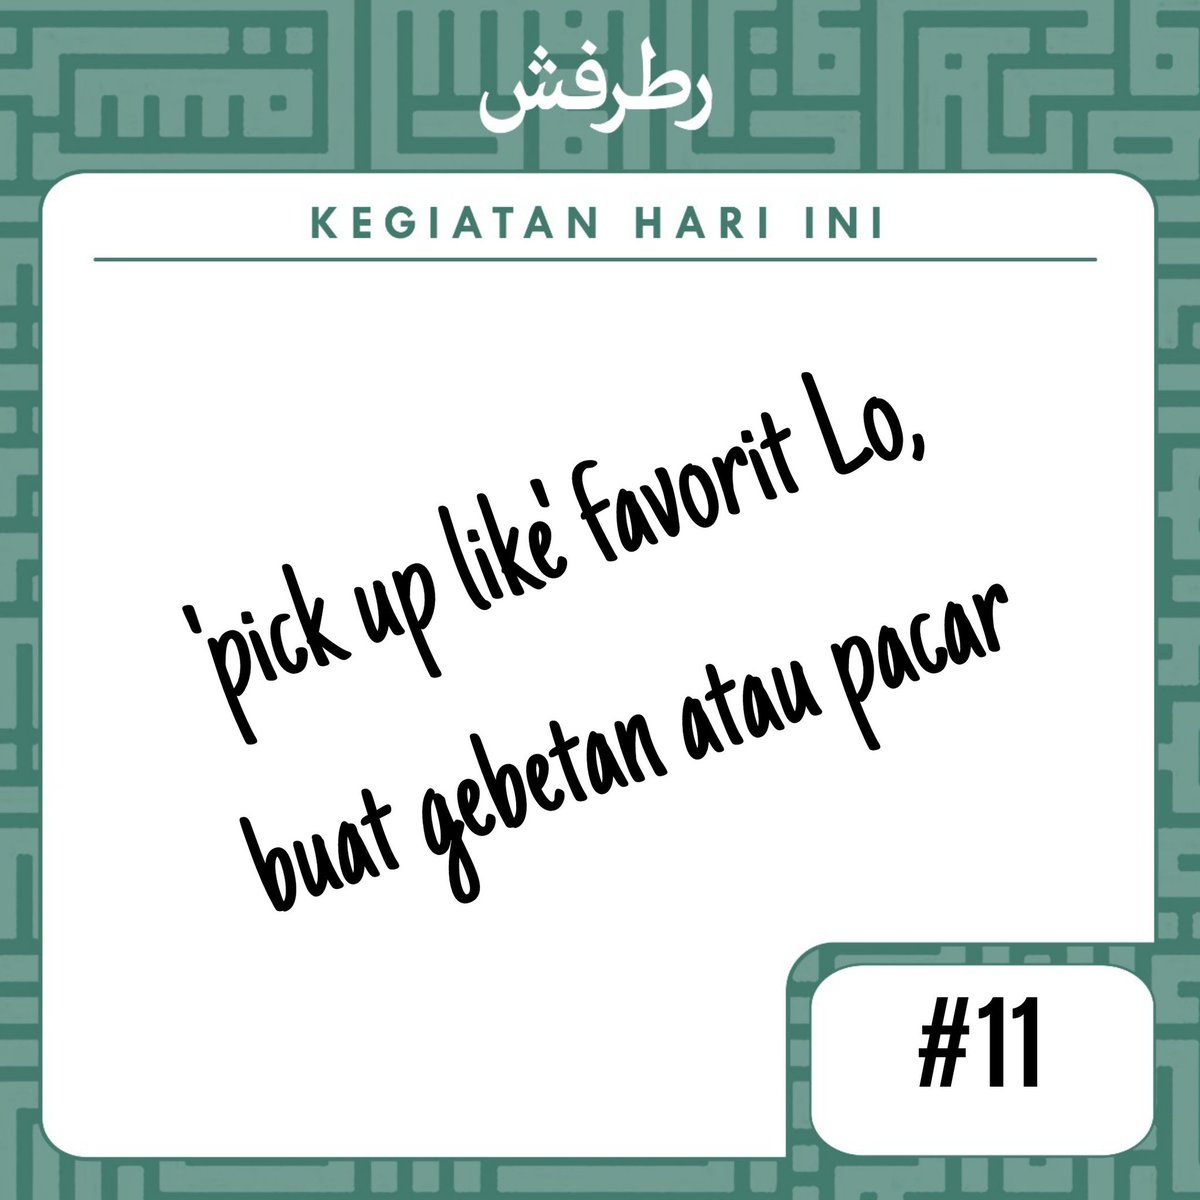  #RamadhanBarengRetropus hari ke-11Roses are red,Violets are blue,I can’t rhyme,but can I date you? @podcastretropus